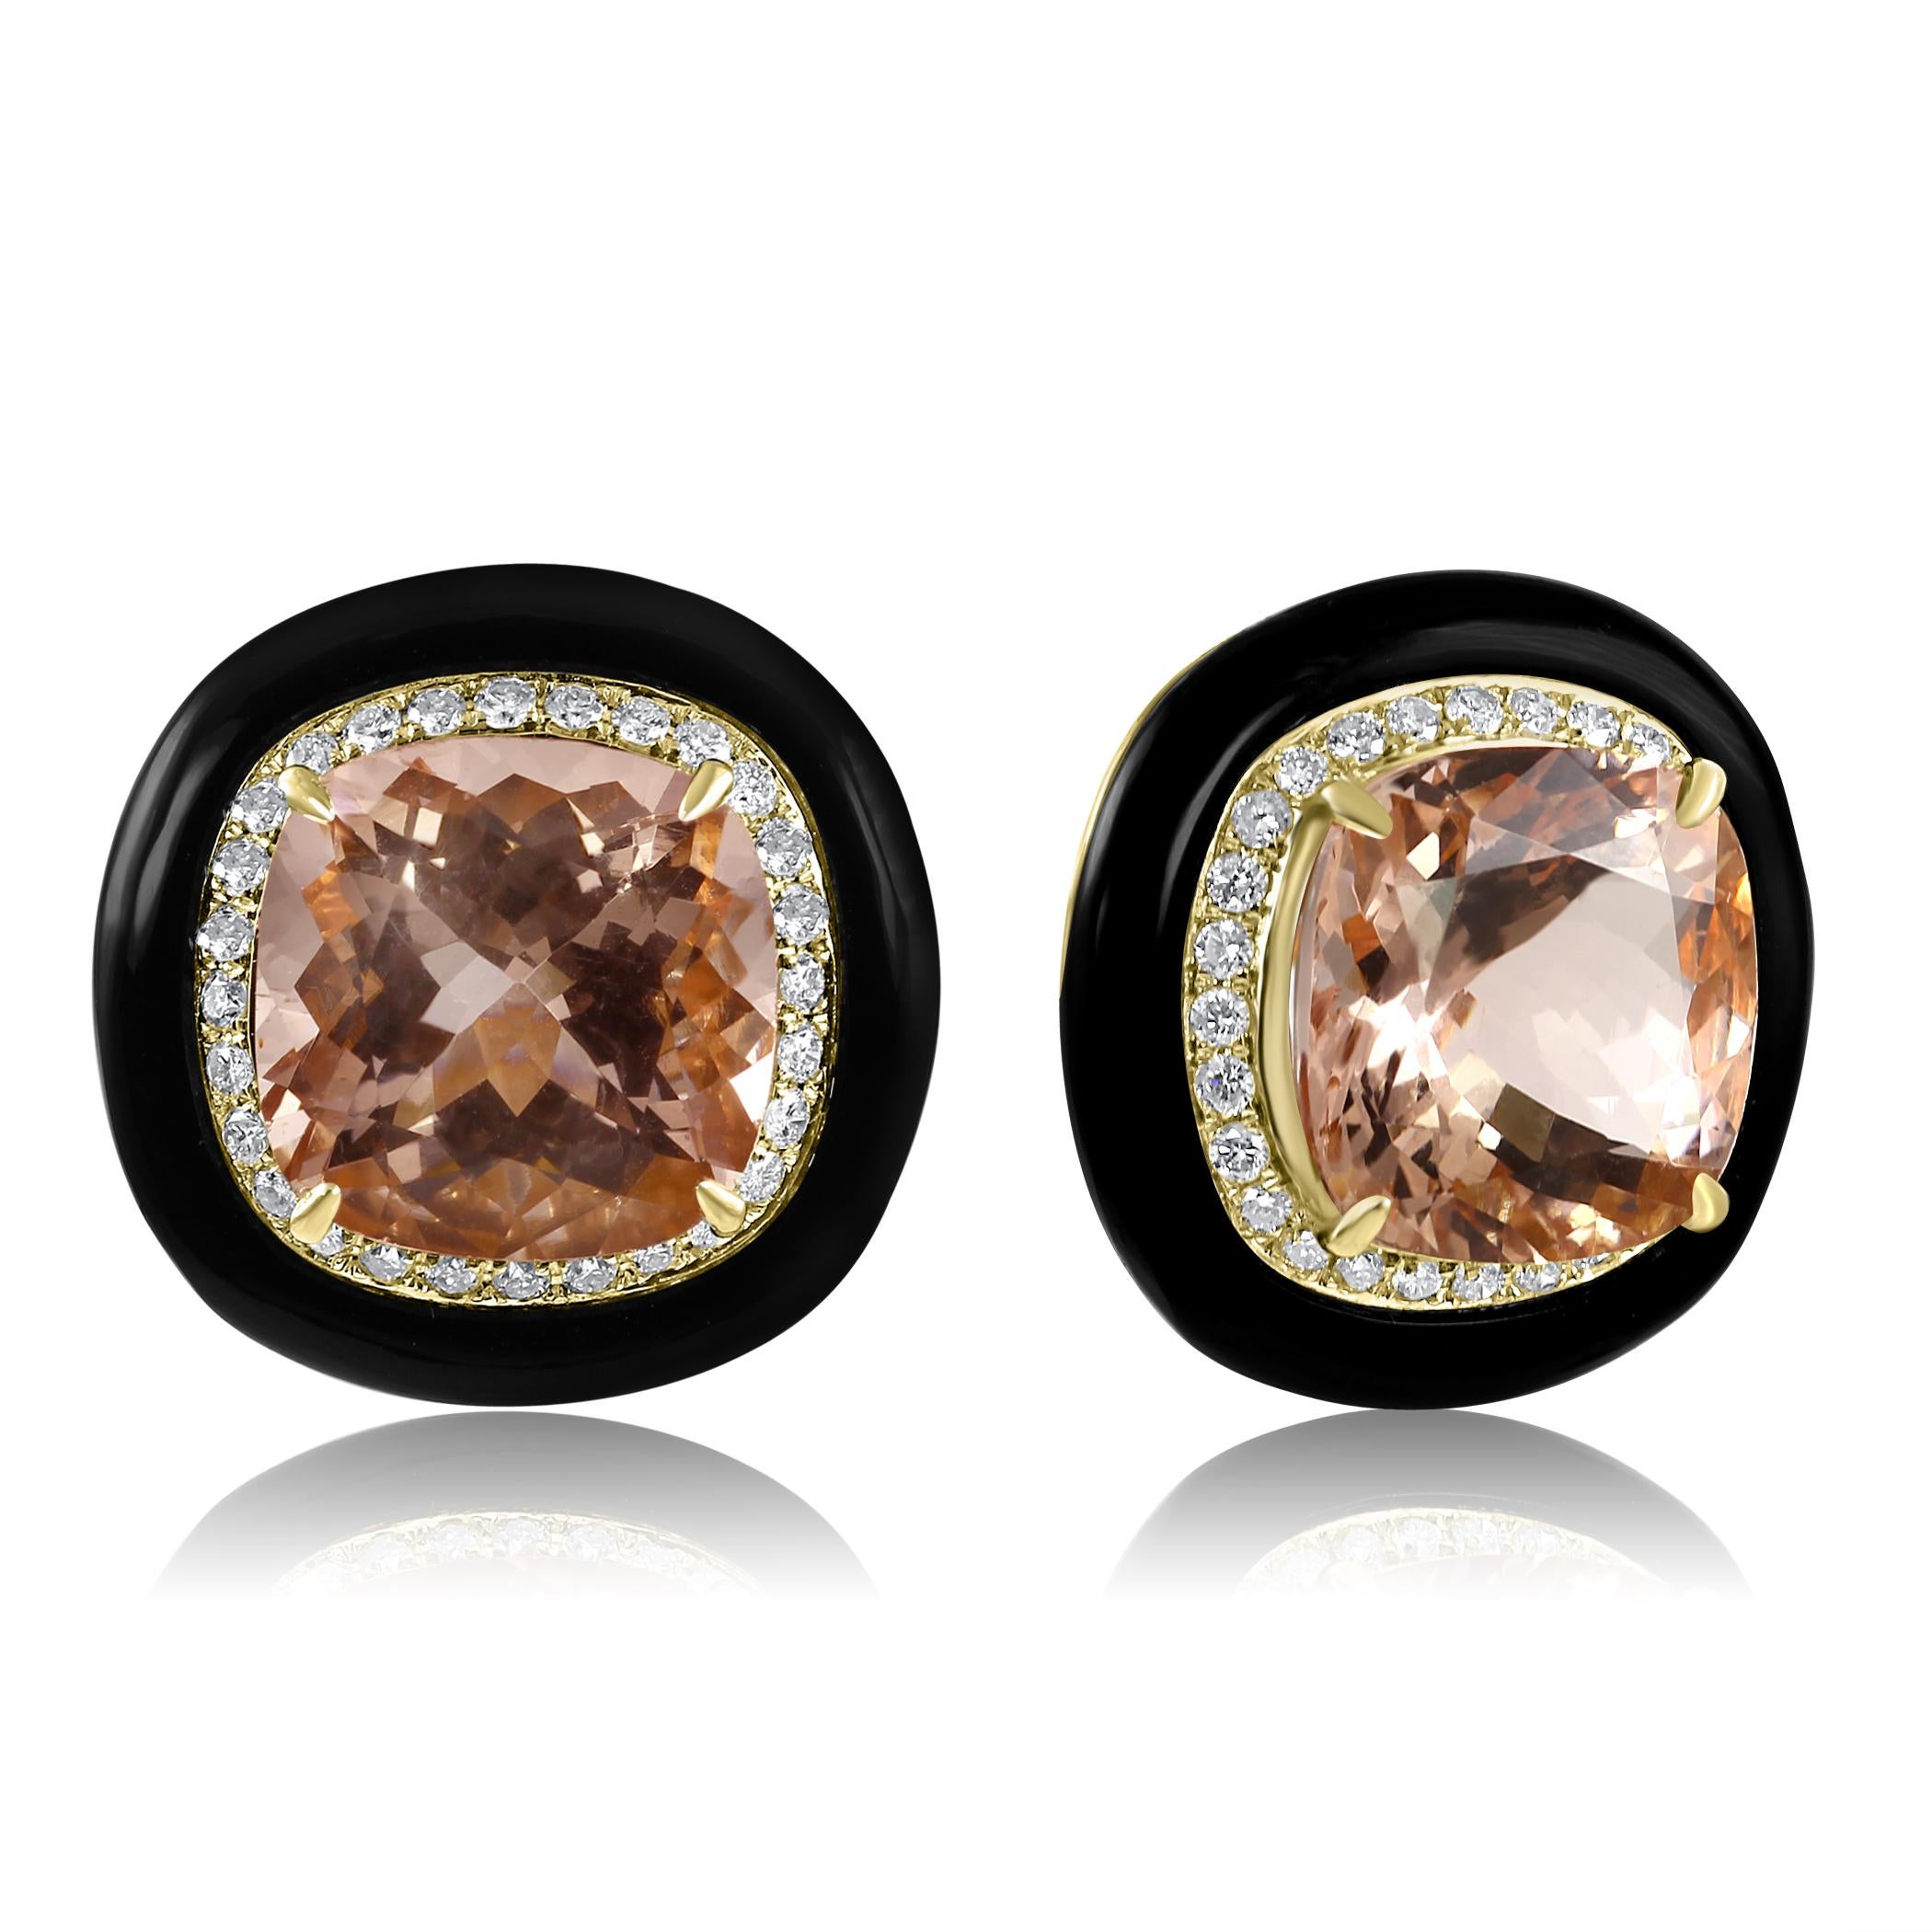 At the heart of these captivating earrings lies a magnificent Morganite Cushion, carefully selected for its substantial size and exquisite clarity. With a total weight of 13.46 carats, this morganite gemstone boasts a soft, peachy-pink hue that